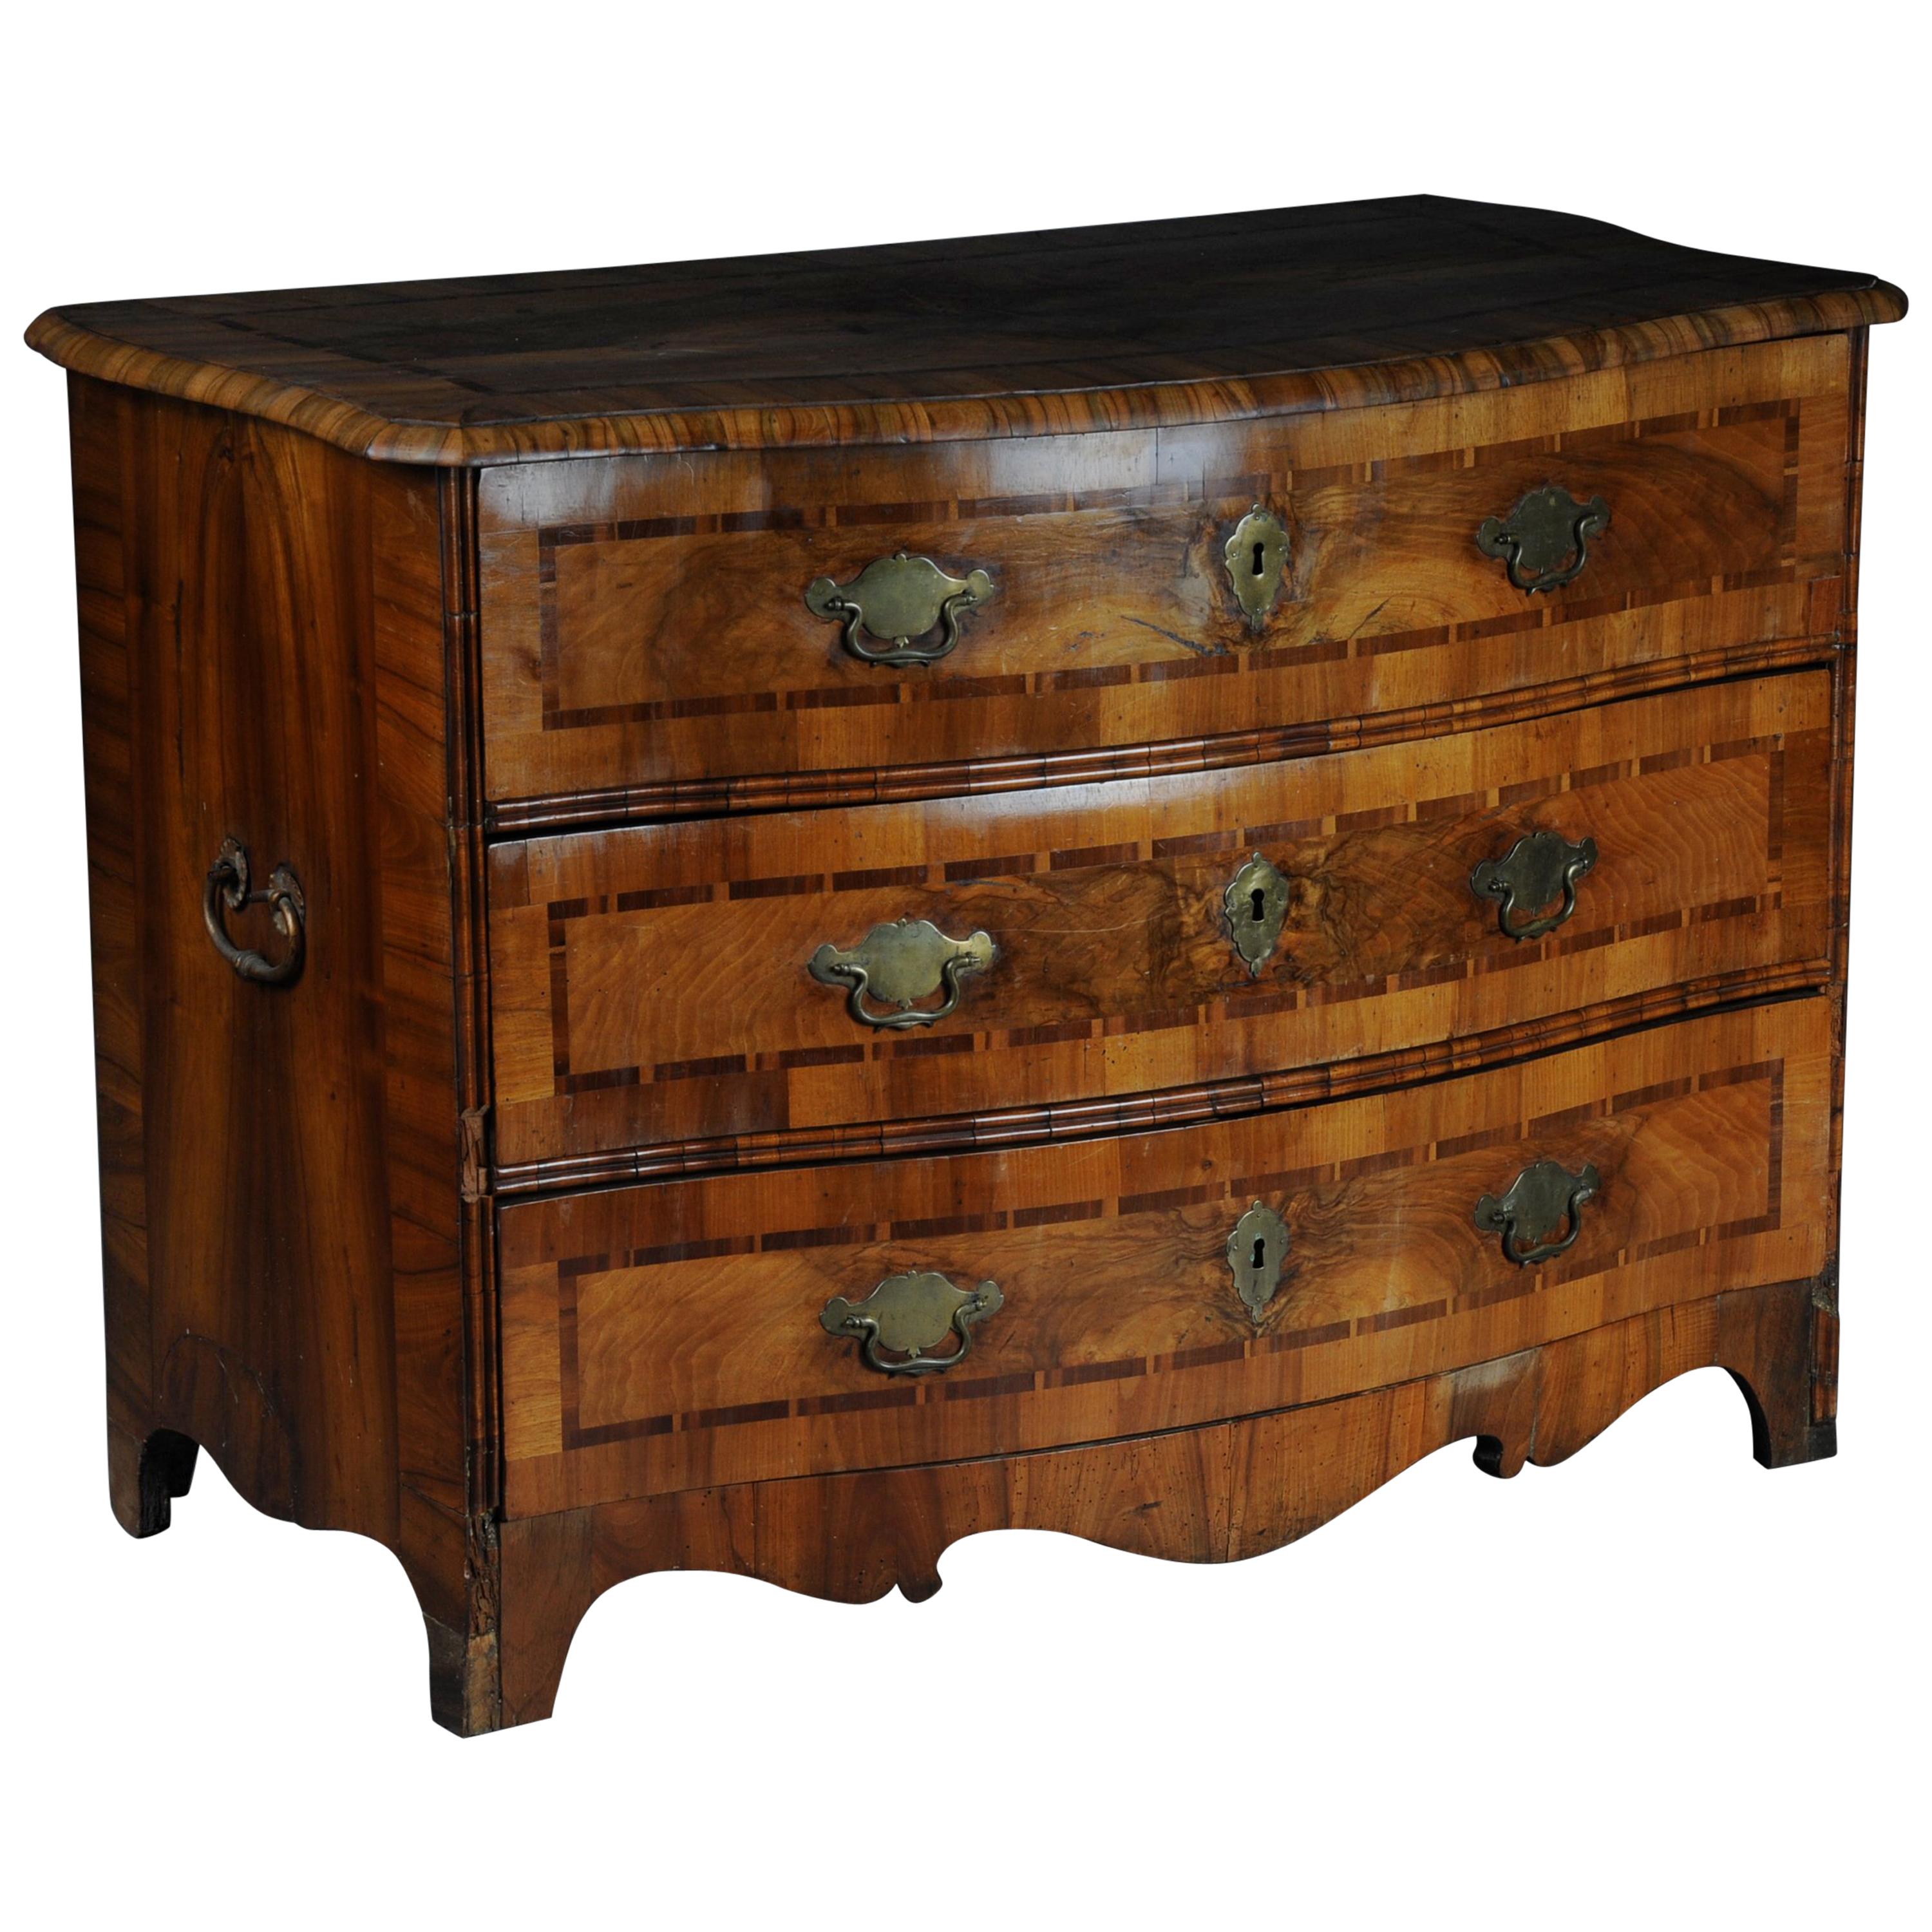 Baroque Chest of Drawers in Walnut, German, circa 1740